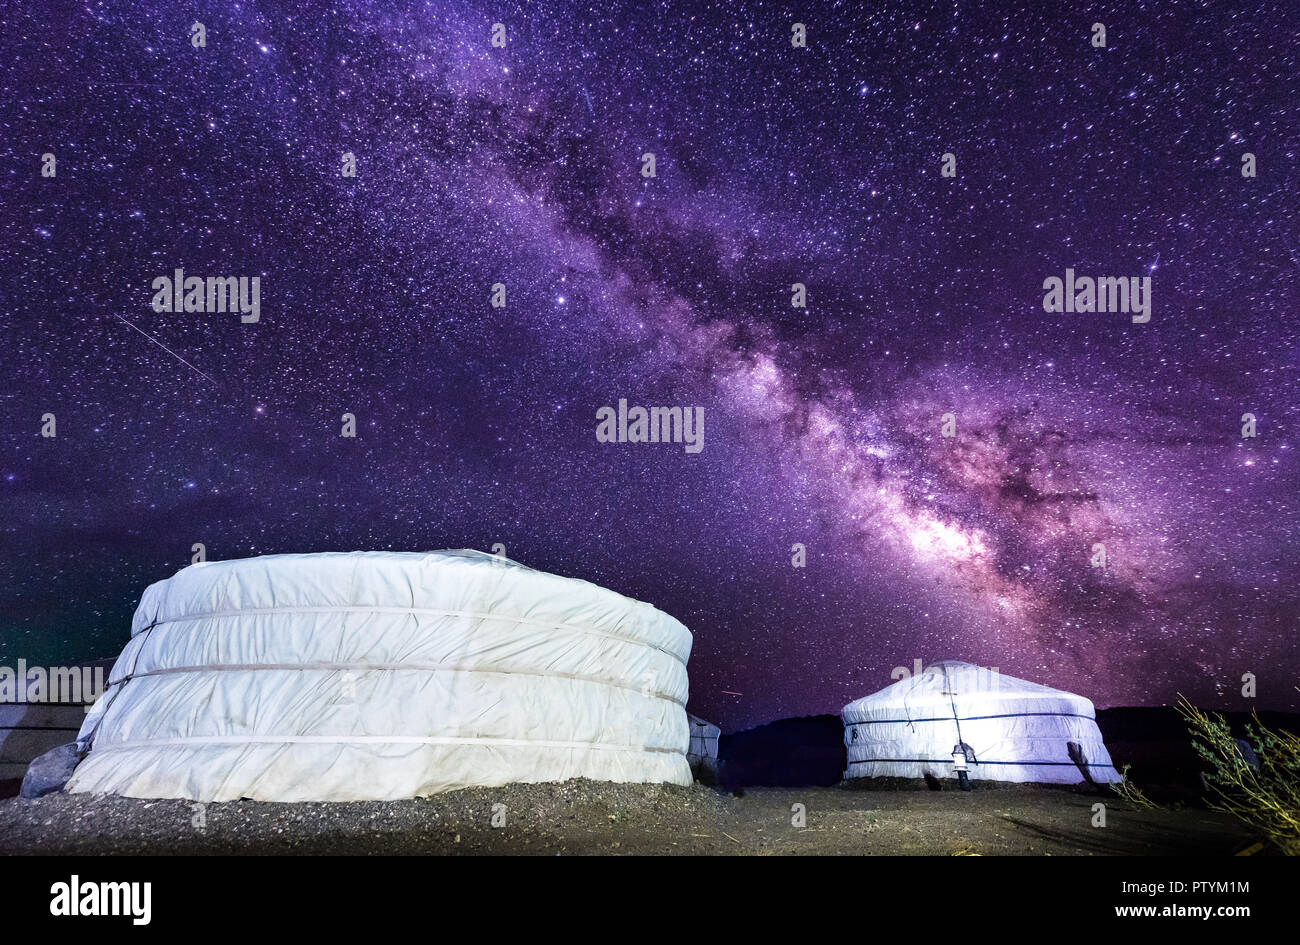 Milky way over ger camp in Mongolia gobi desert. Millions of stars in the sky at night in Mongol desert at a ger tent camp. Beautiful night sky with s Stock Photo